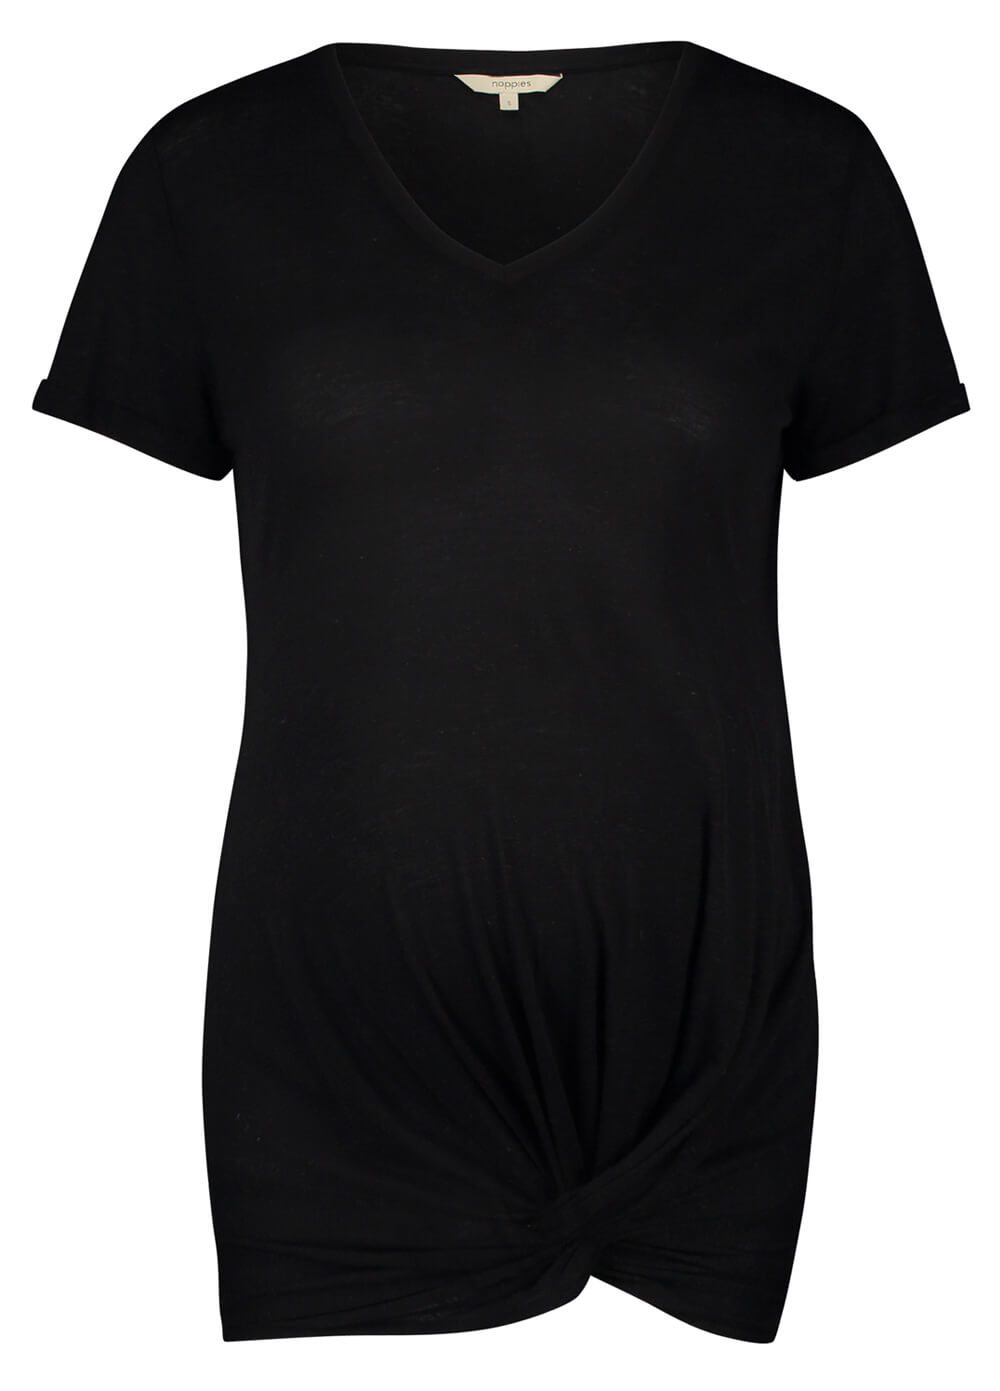 Brooke Knot Front Maternity T-Shirt by Noppies